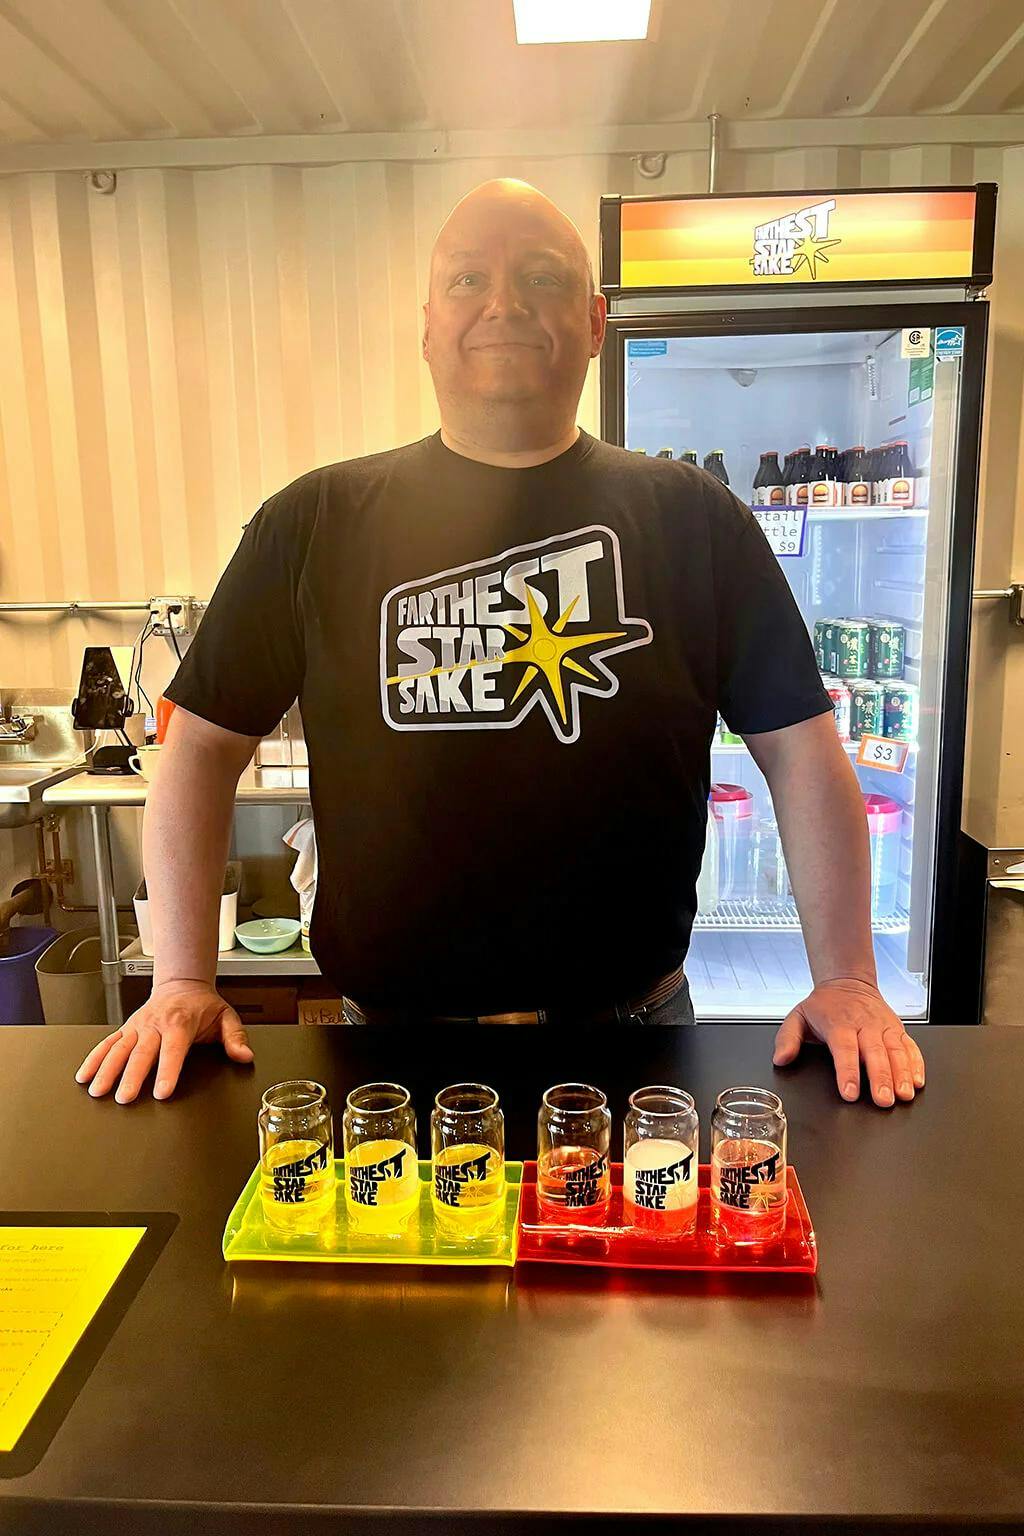 Farthest Star Sake owner and brewer Todd Bellomy offers sake flights in his Medfield, Massachusetts taproom. Left to right: “In A Strange Land,” “Mountains on the Moon,” “Needs of the Many,” “Coconut Business,” “Spruce Dern Returns.” Flavored sake offerings often rotate